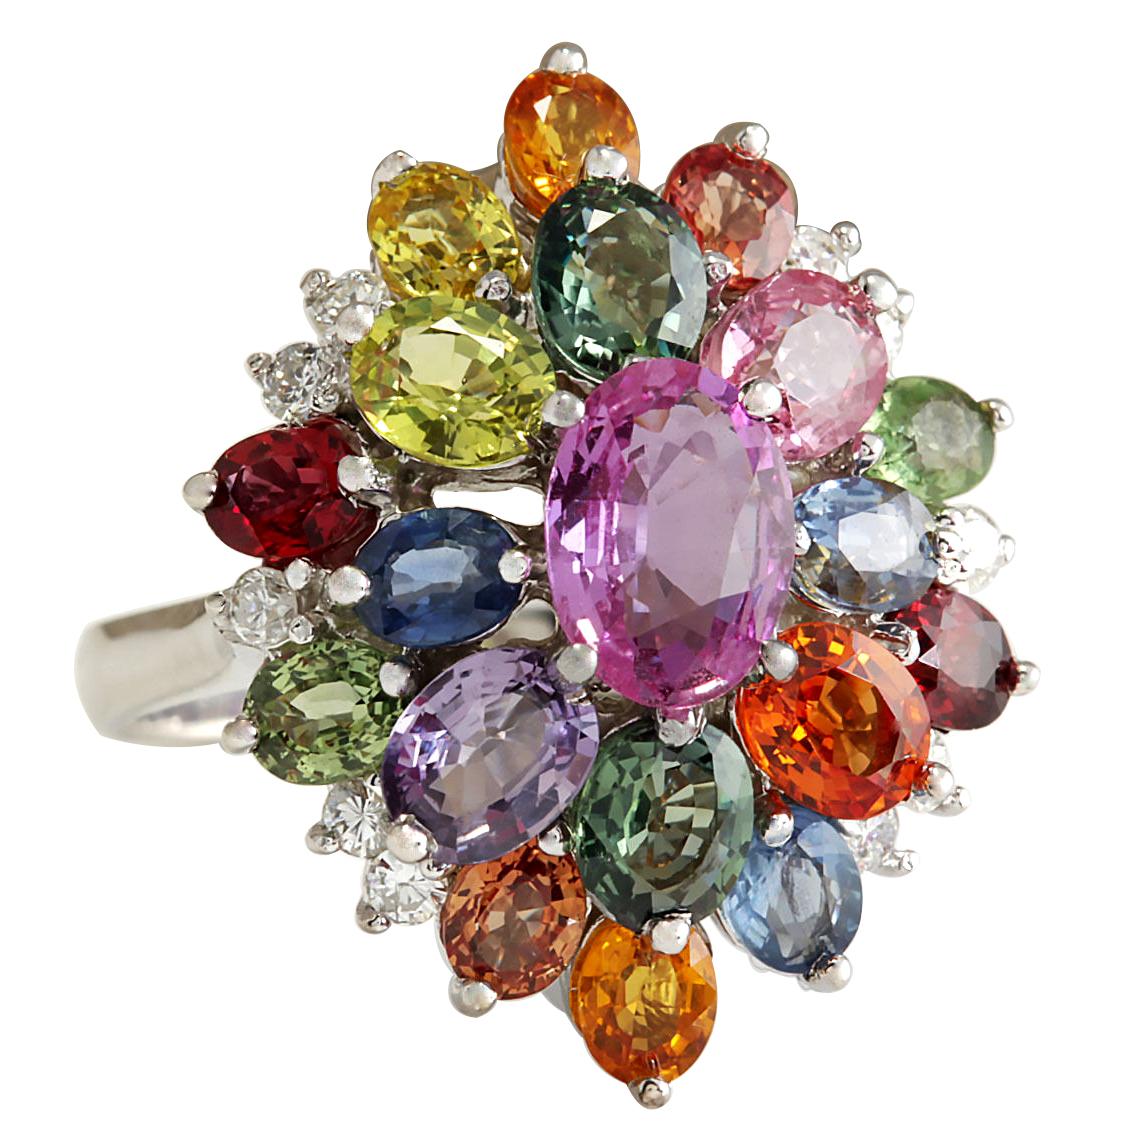 Stamped: 14K White Gold
Total Ring Weight: 6.5 Grams
Total Natural Center Ceylon Sapphire Weight is 1.30 Carat (Measures: 8.00x6.00 mm)
Color: Pink
Total Natural Side Ceylon Sapphire Weight is 6.03 Carat
Color: Multicolor
Diamond Weight: Total